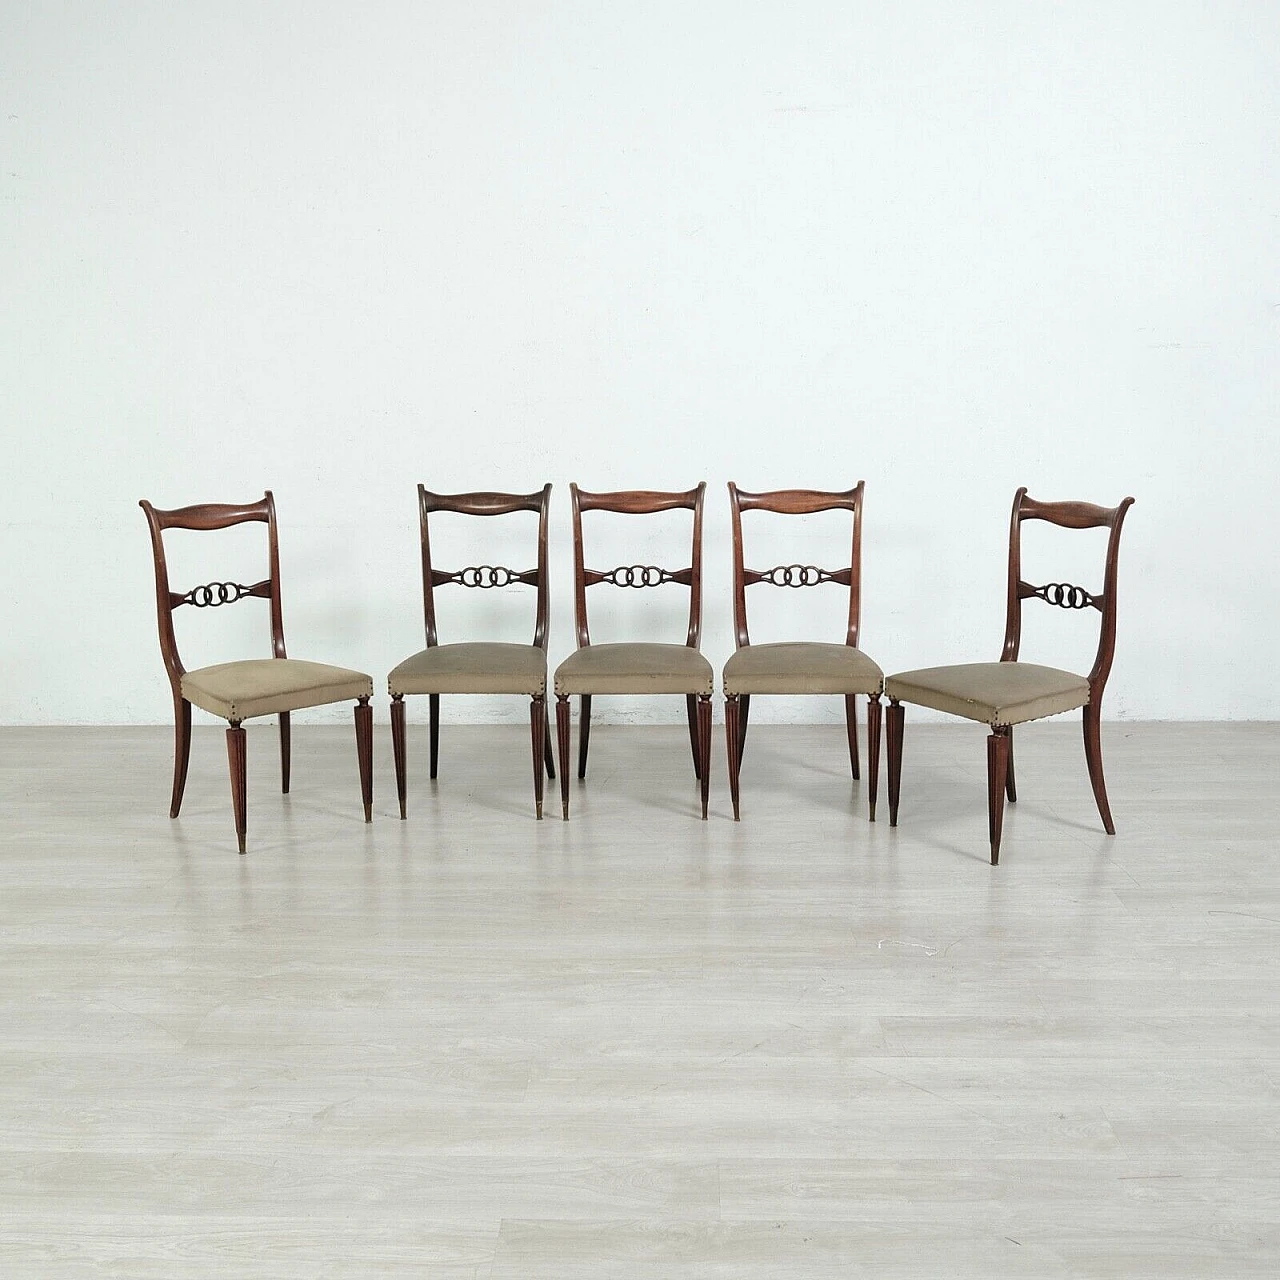 5 Chairs in wood and canvas plastic, 1950s 17